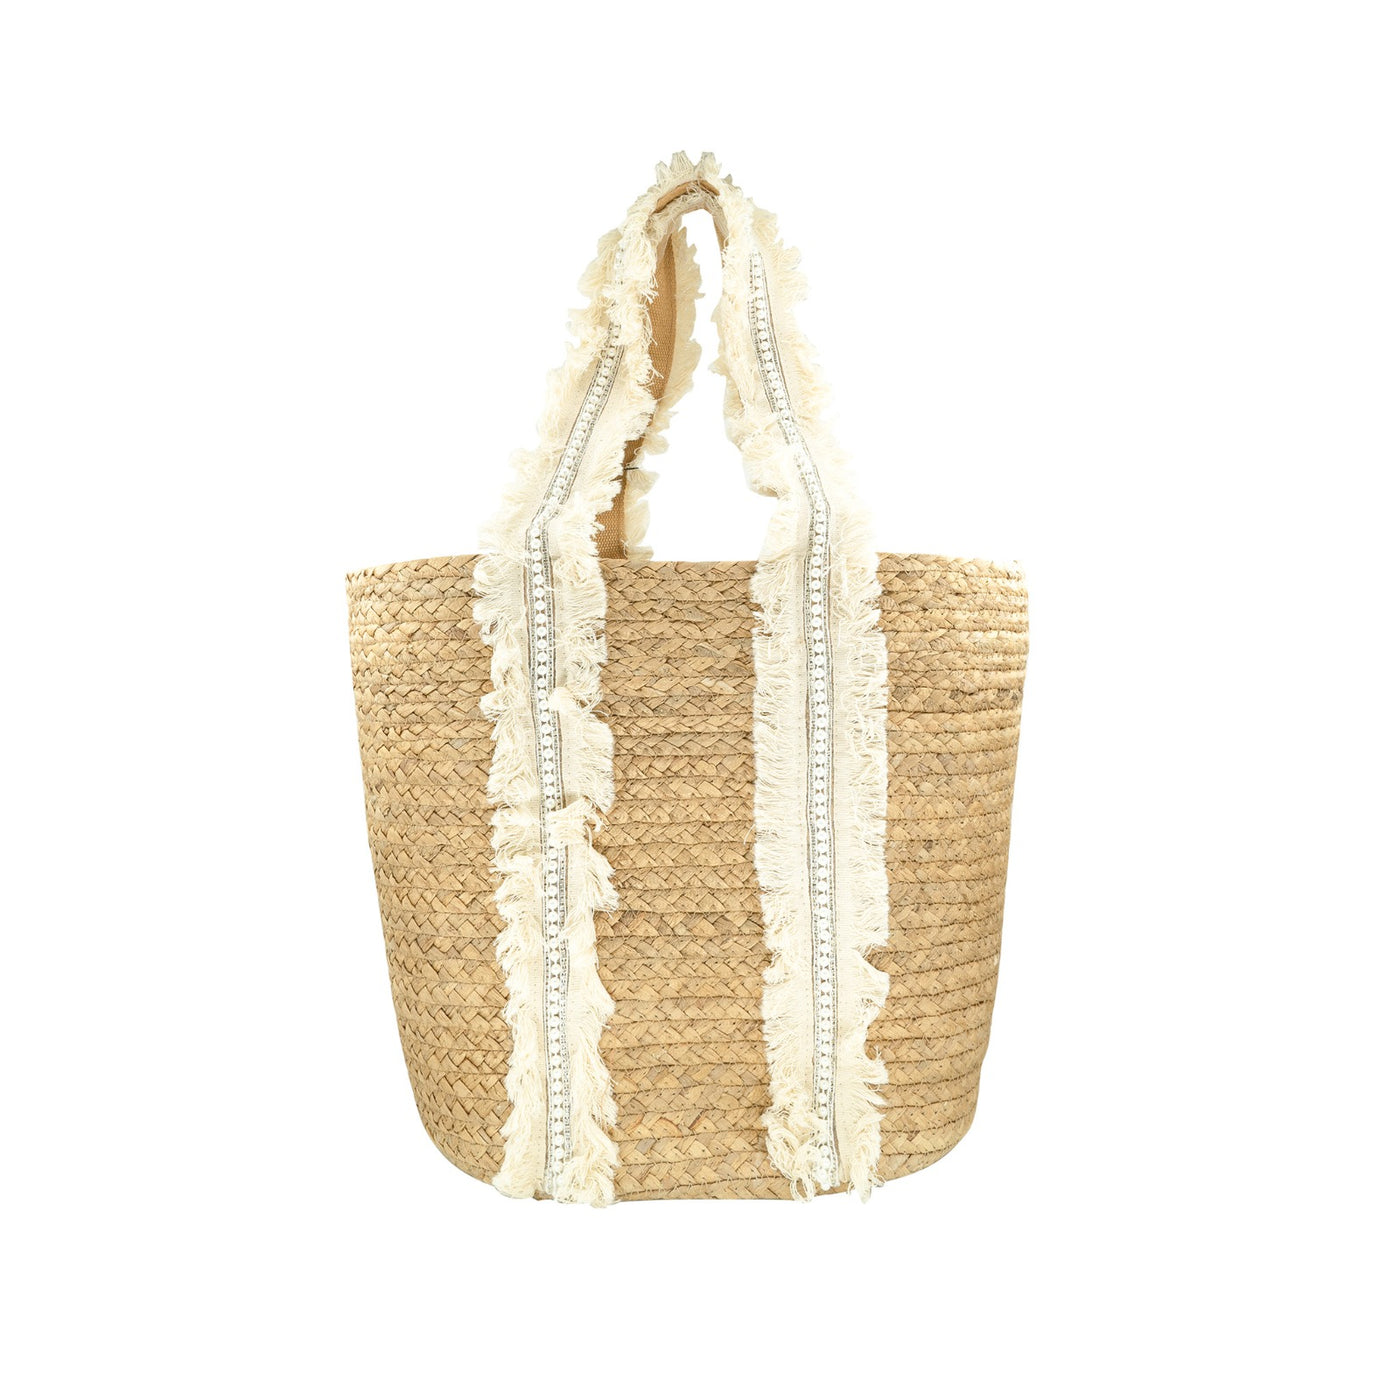 Straw Summer Tote Bag- Natural/White - Cutely Covered